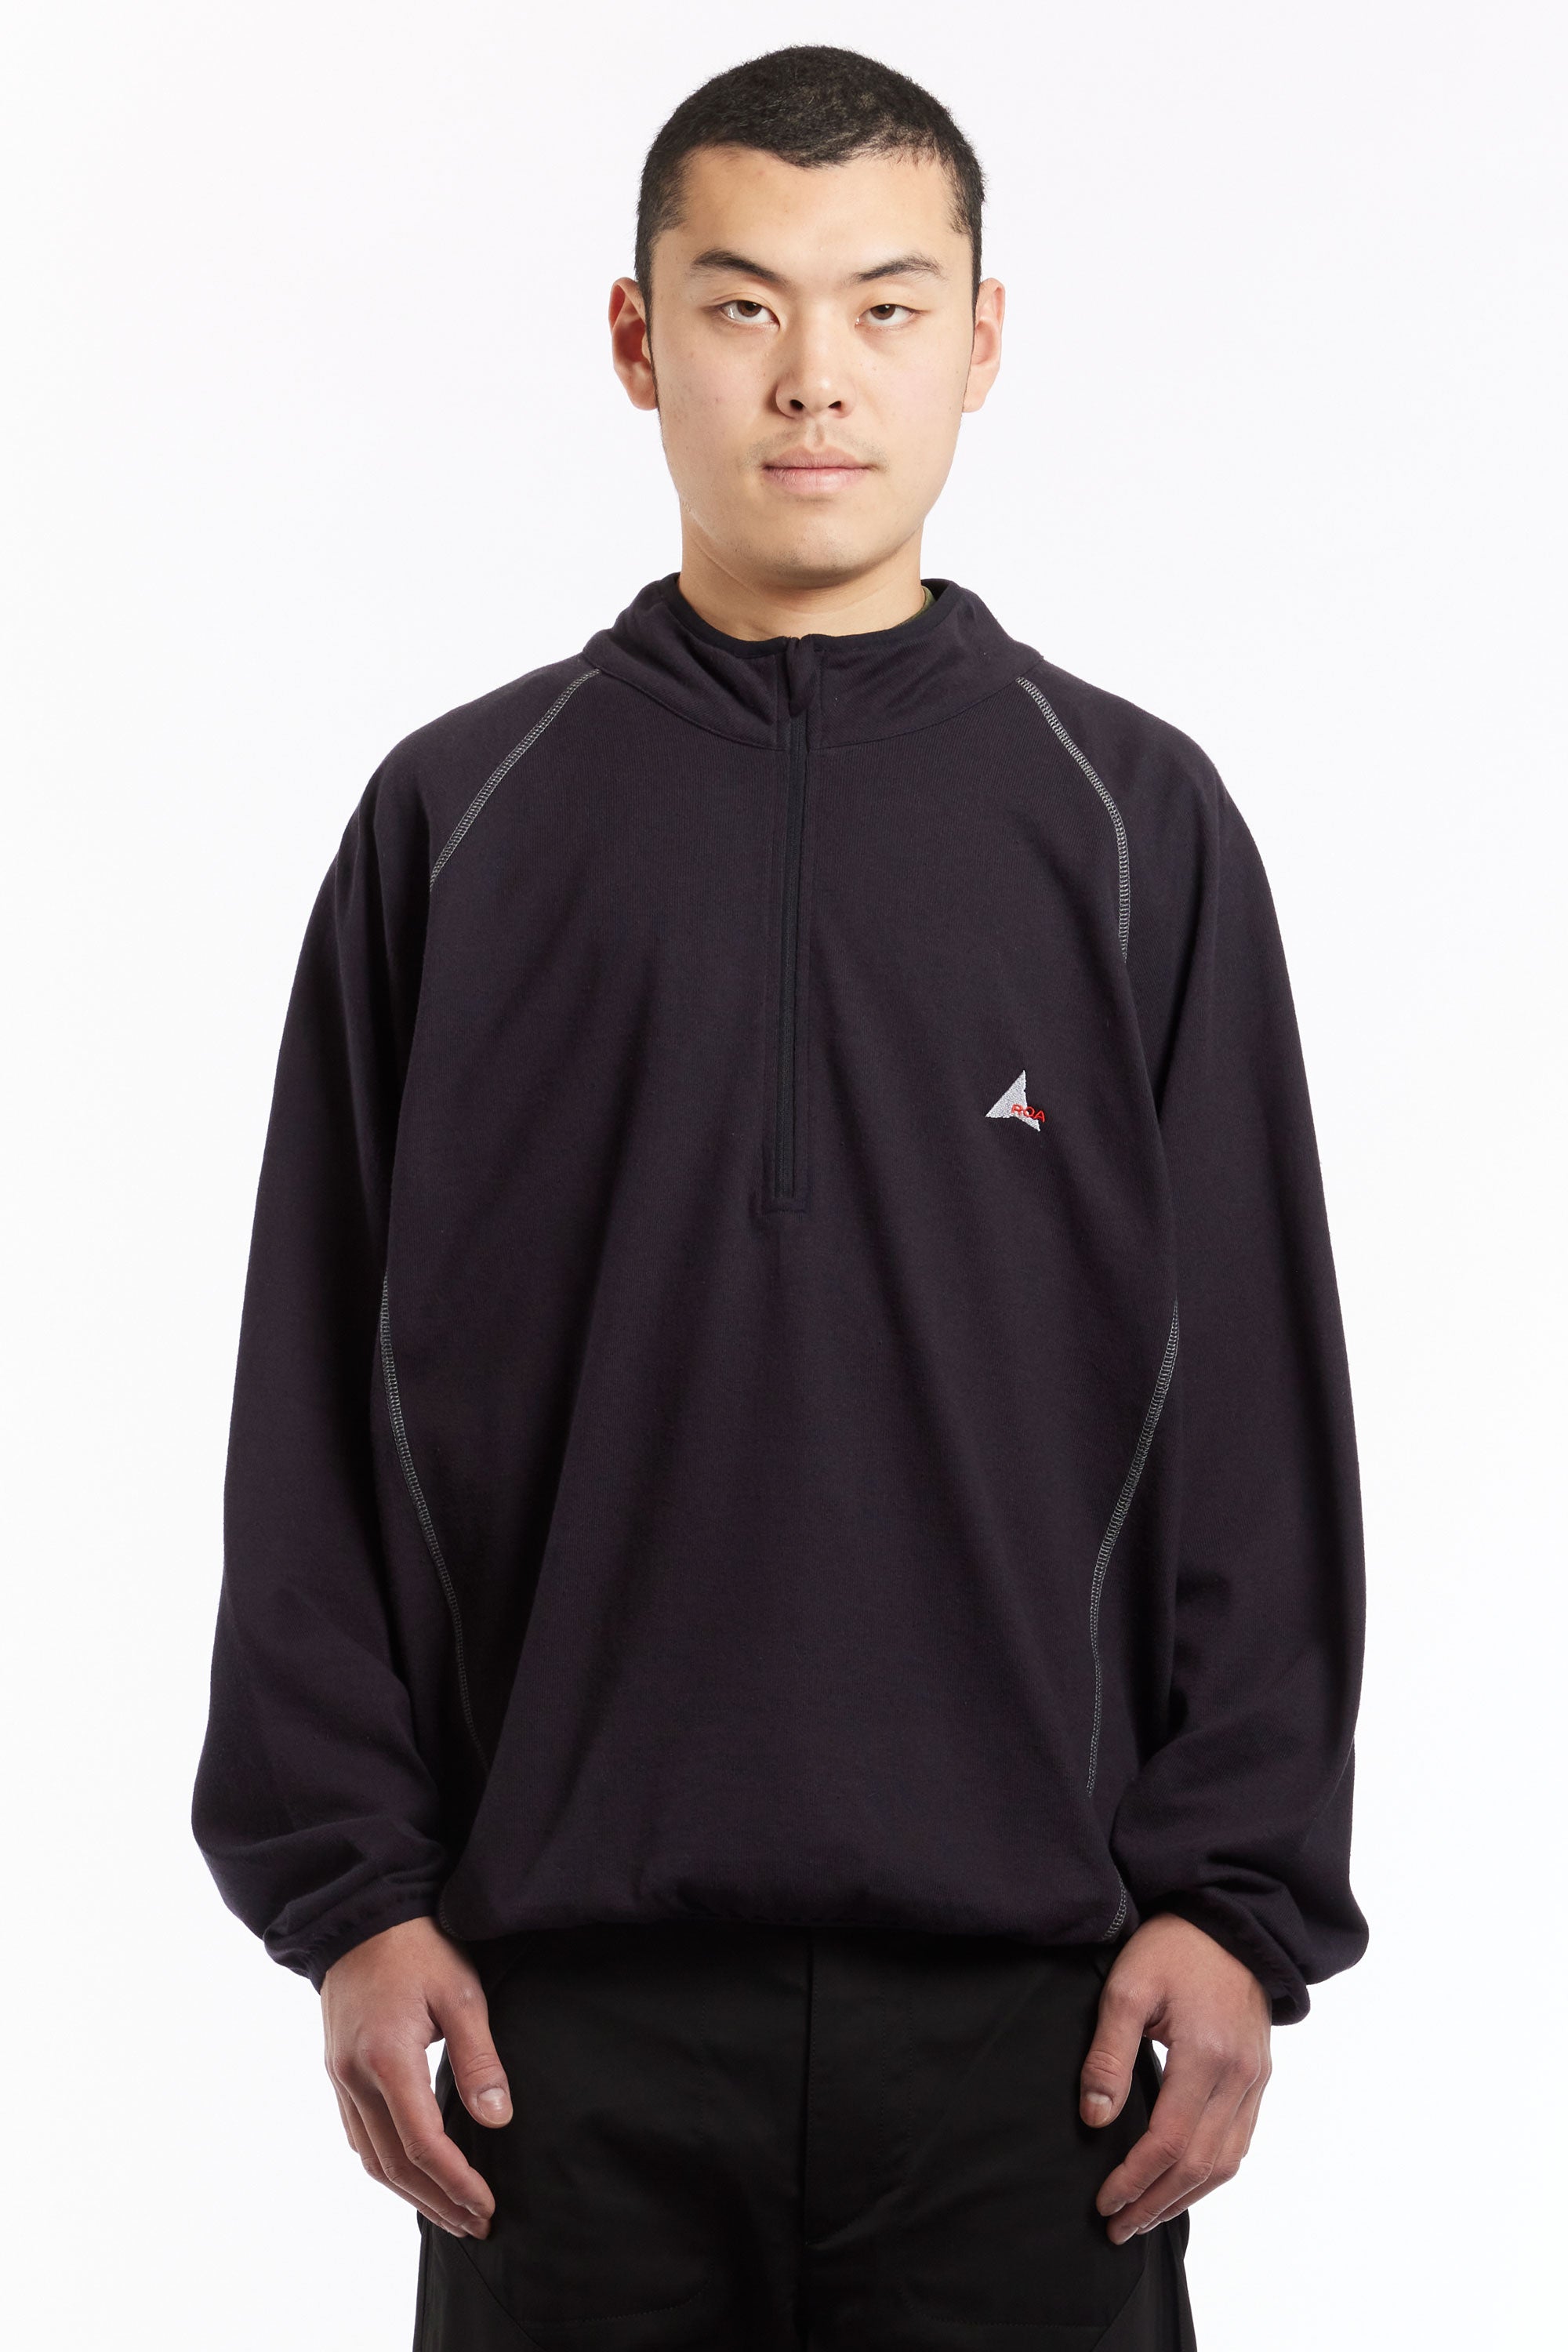 The ROA - JERSEY HALF ZIP  available online with global shipping, and in PAM Stores Melbourne and Sydney.